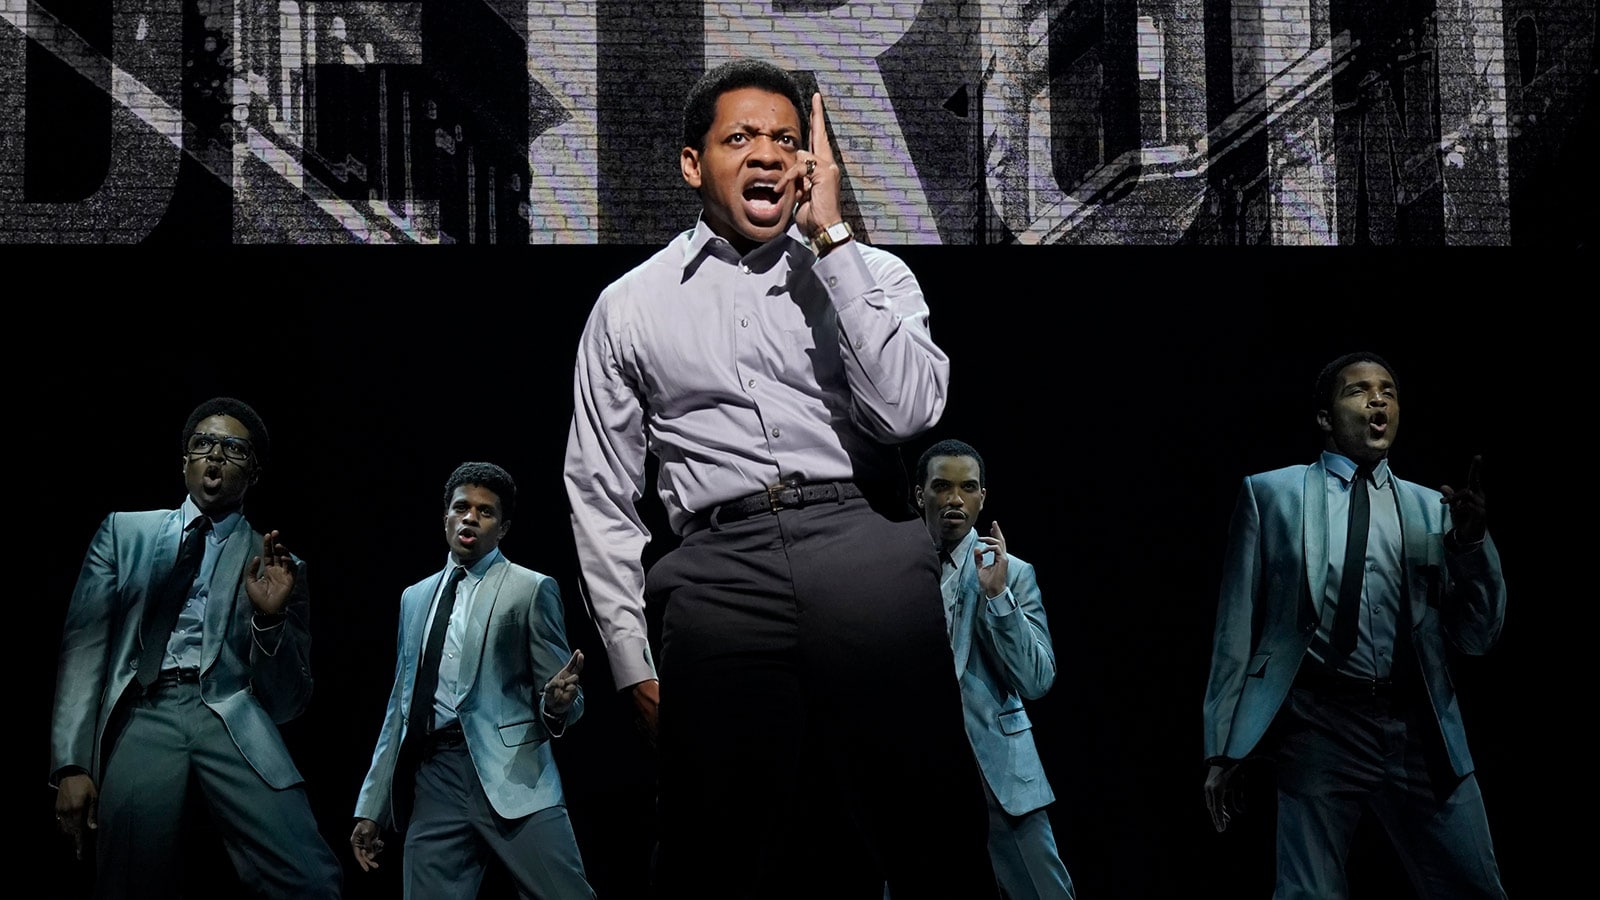 (foreground) Derrick Baskin (Otis Williams); (background, l to r) Ephraim Sykes (David Ruffin), Jeremy Pope (Eddie Kendricks), Jared Joseph (Melvin Franklin), and James Harkness (Paul Williams) in the world premiere of Ain’t Too Proud—The Life and Times of The Temptations at Berkeley Repertory Theatre.